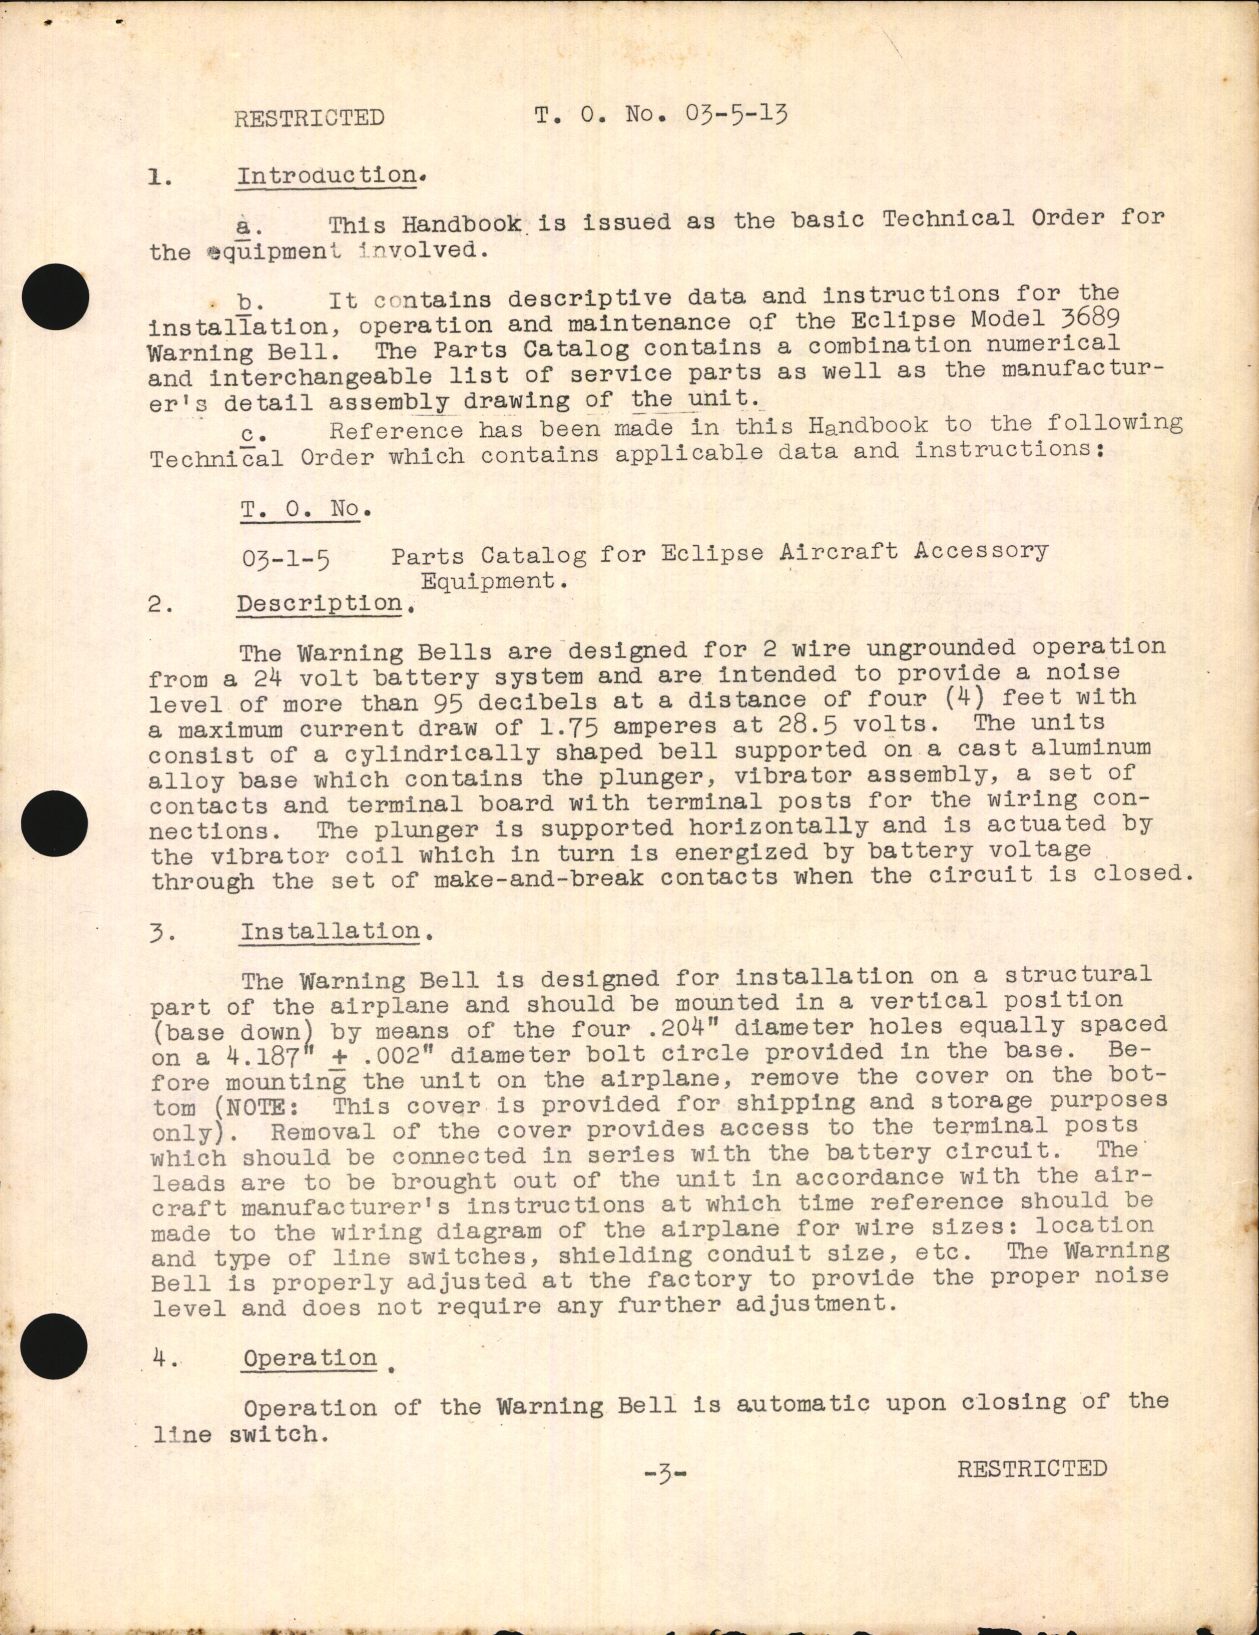 Sample page 5 from AirCorps Library document: Handbook of Instructions for Warning Bells